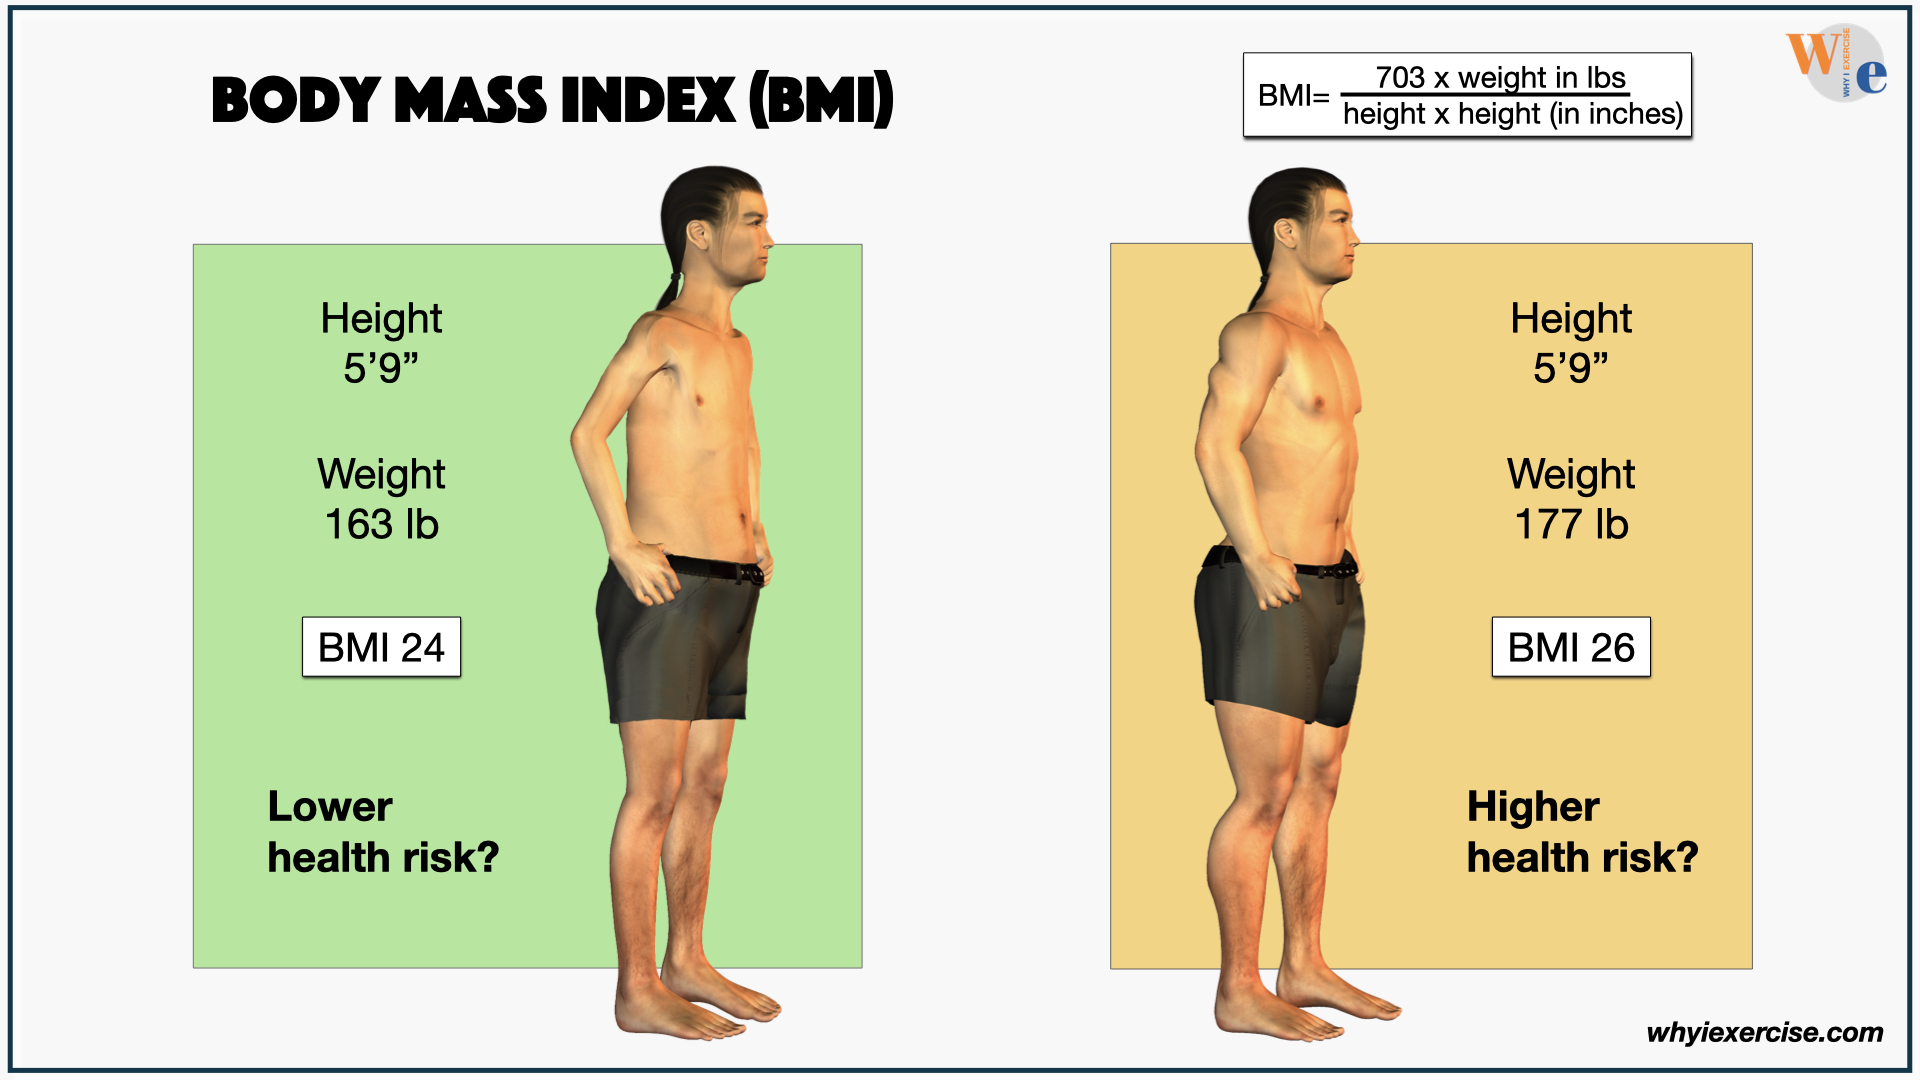 muscular and overweight vs. lighter weight inactive (BMI)